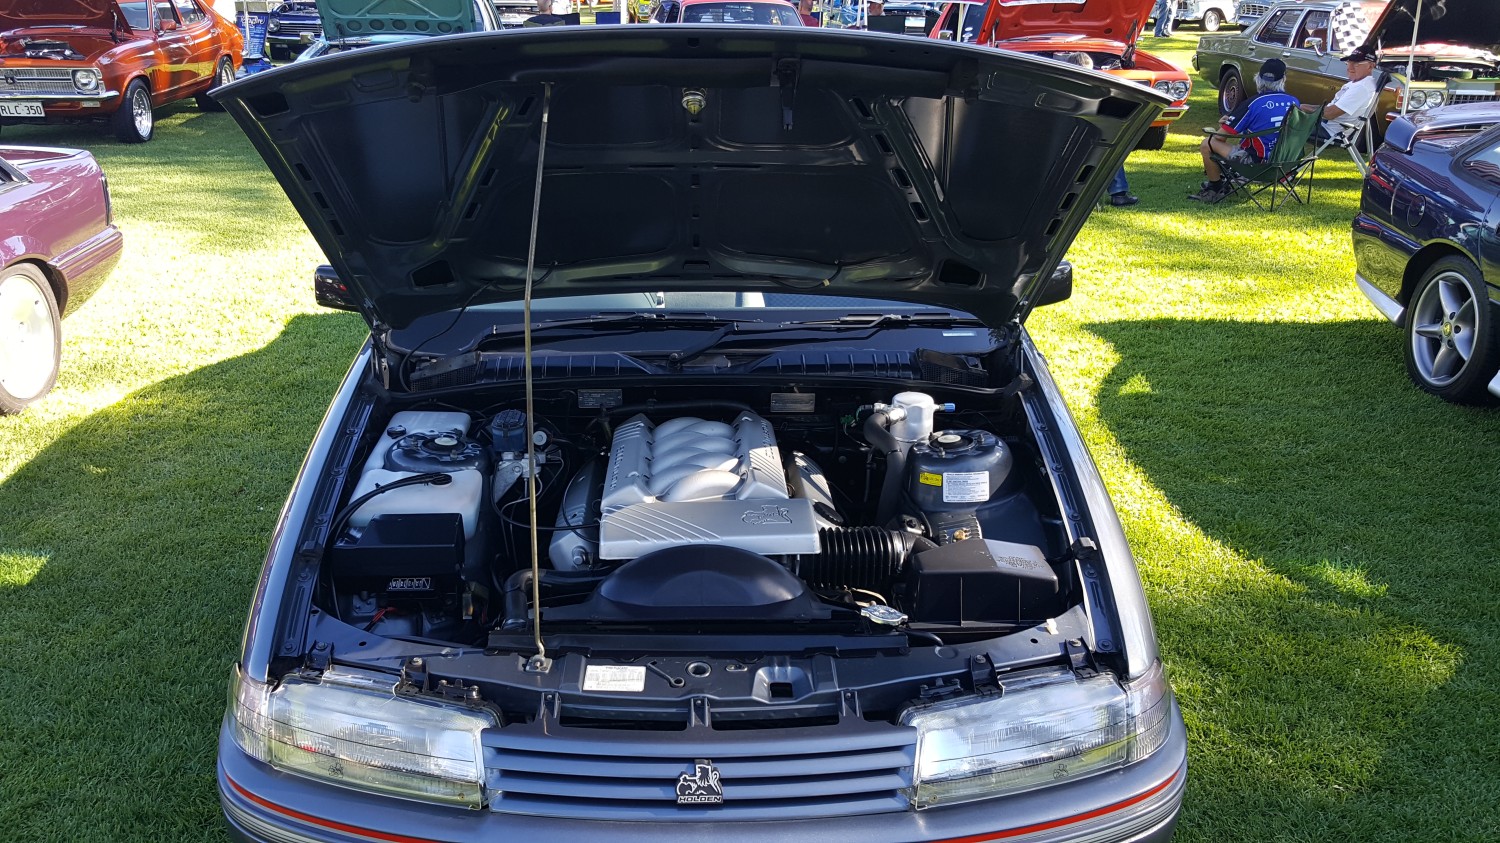 1991 Holden COMMODORE SS VN